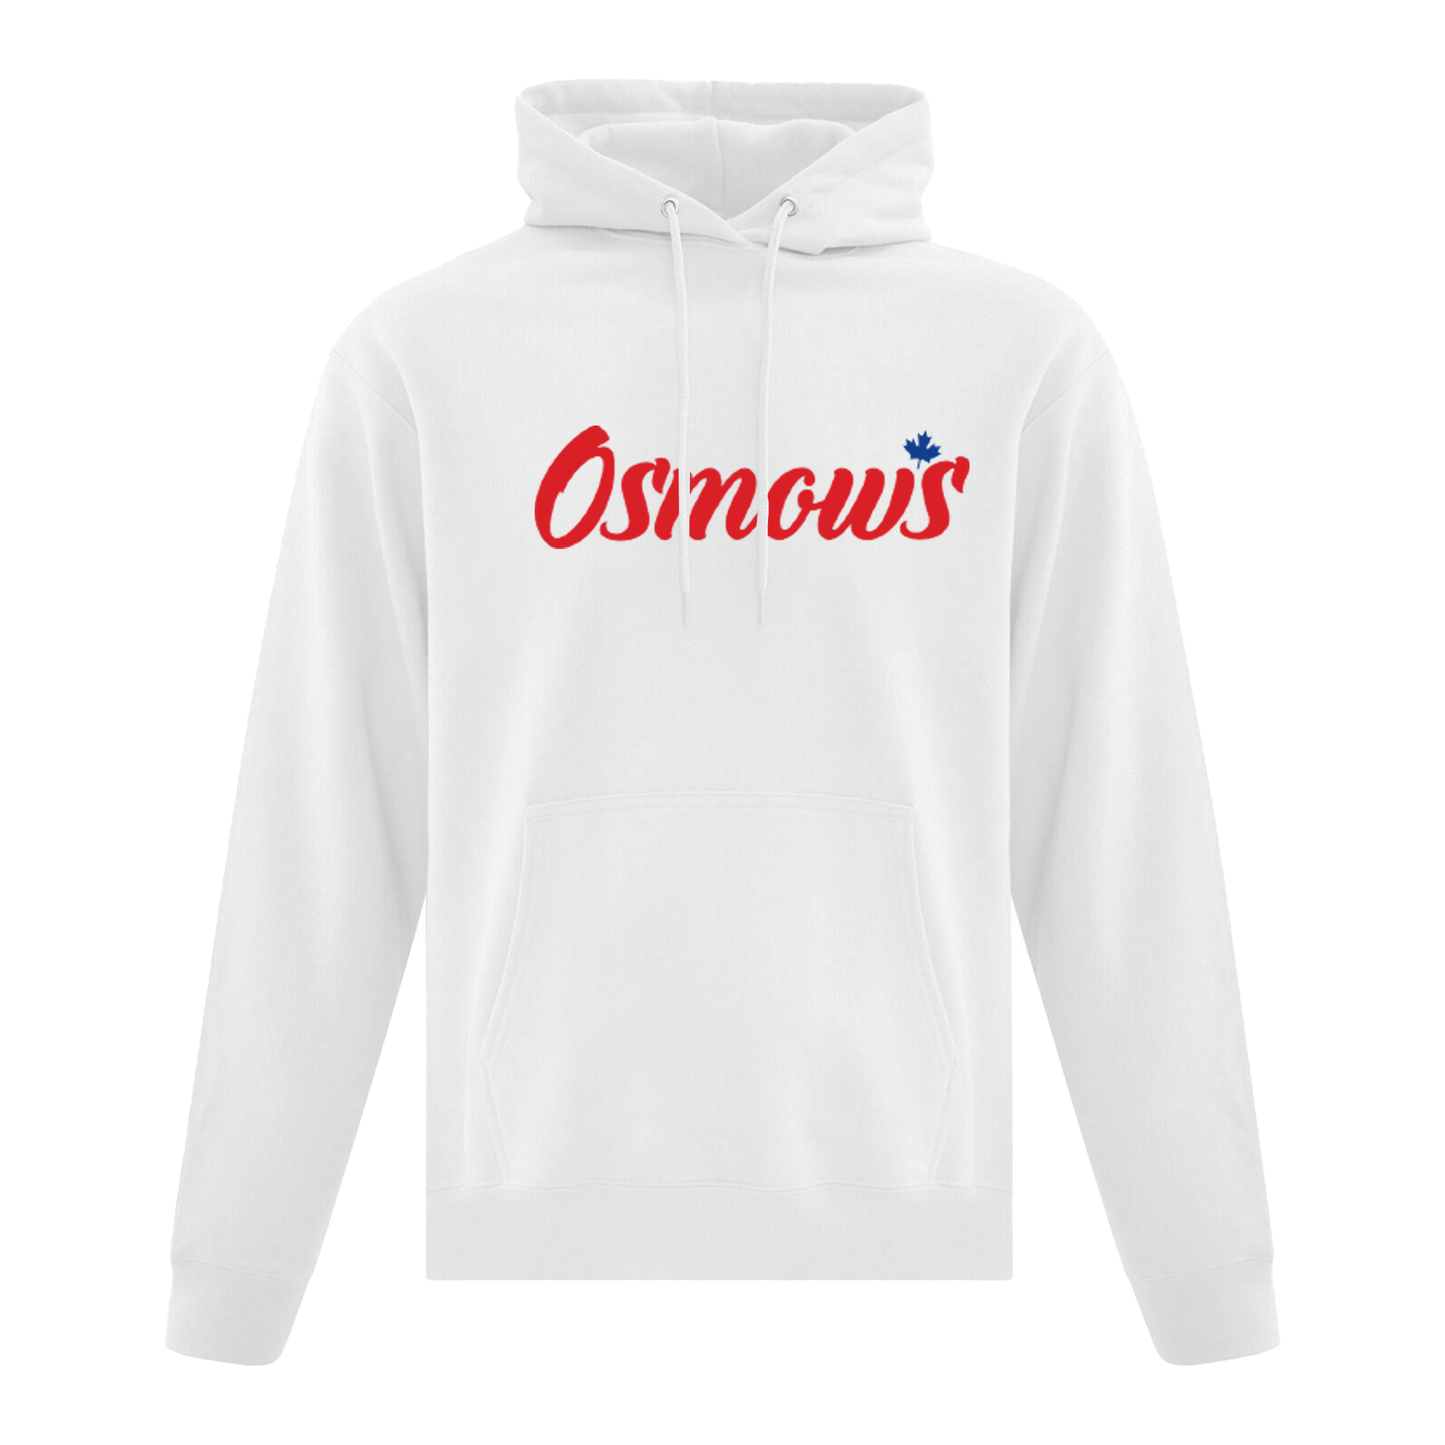 Osmow's Pullover Hoodie - White